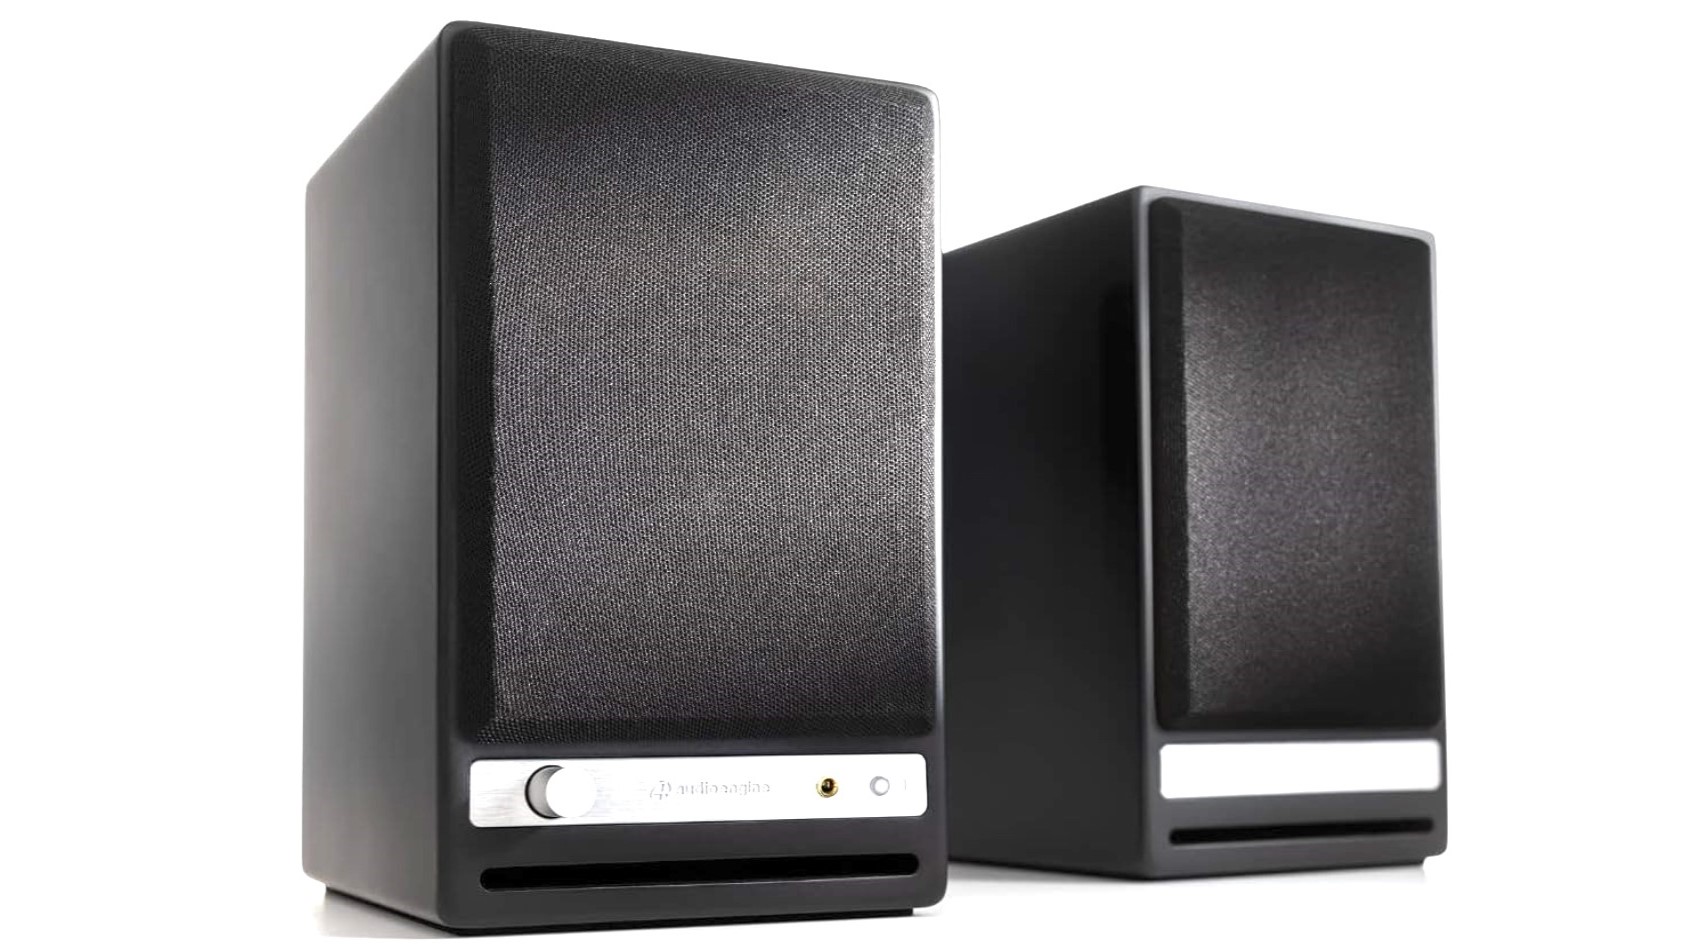 The most mind-blowing speakers you can get for your home